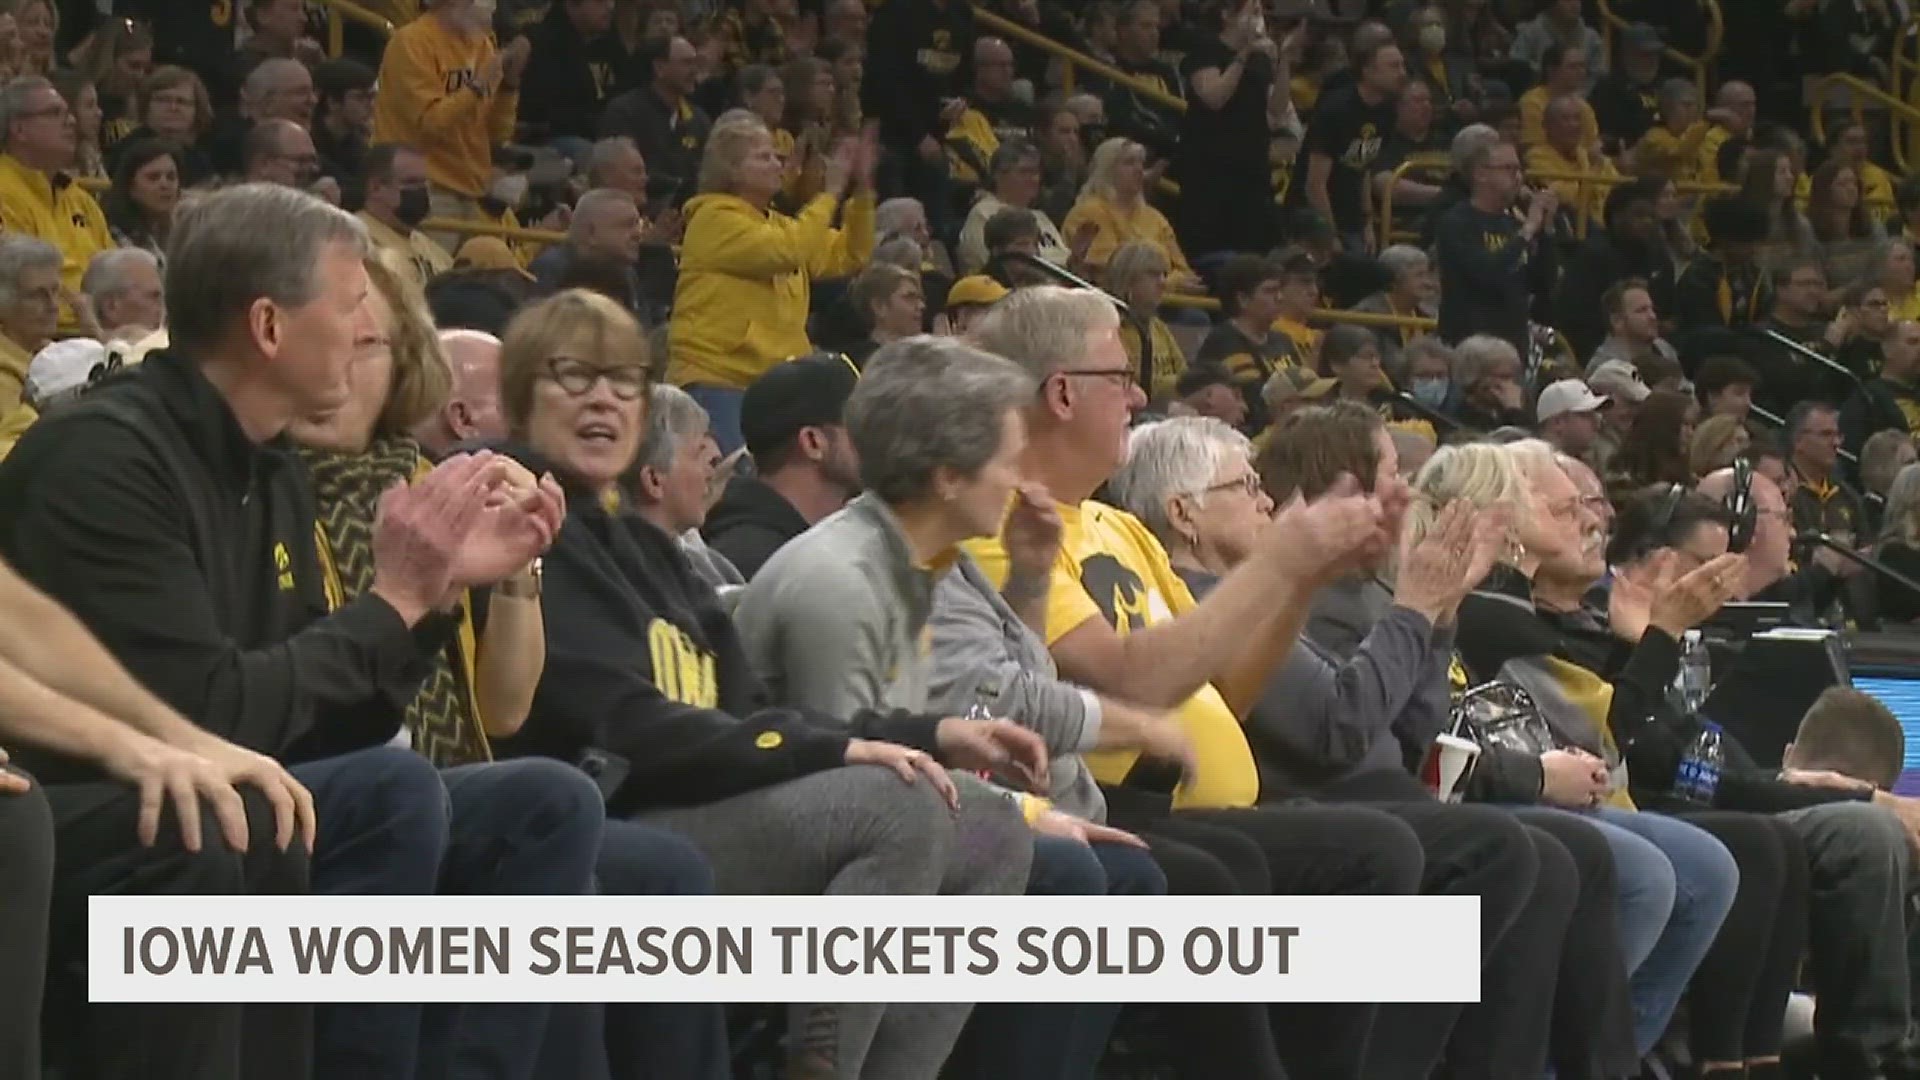 The University of Iowa announced the sell-out on Monday afternoon.